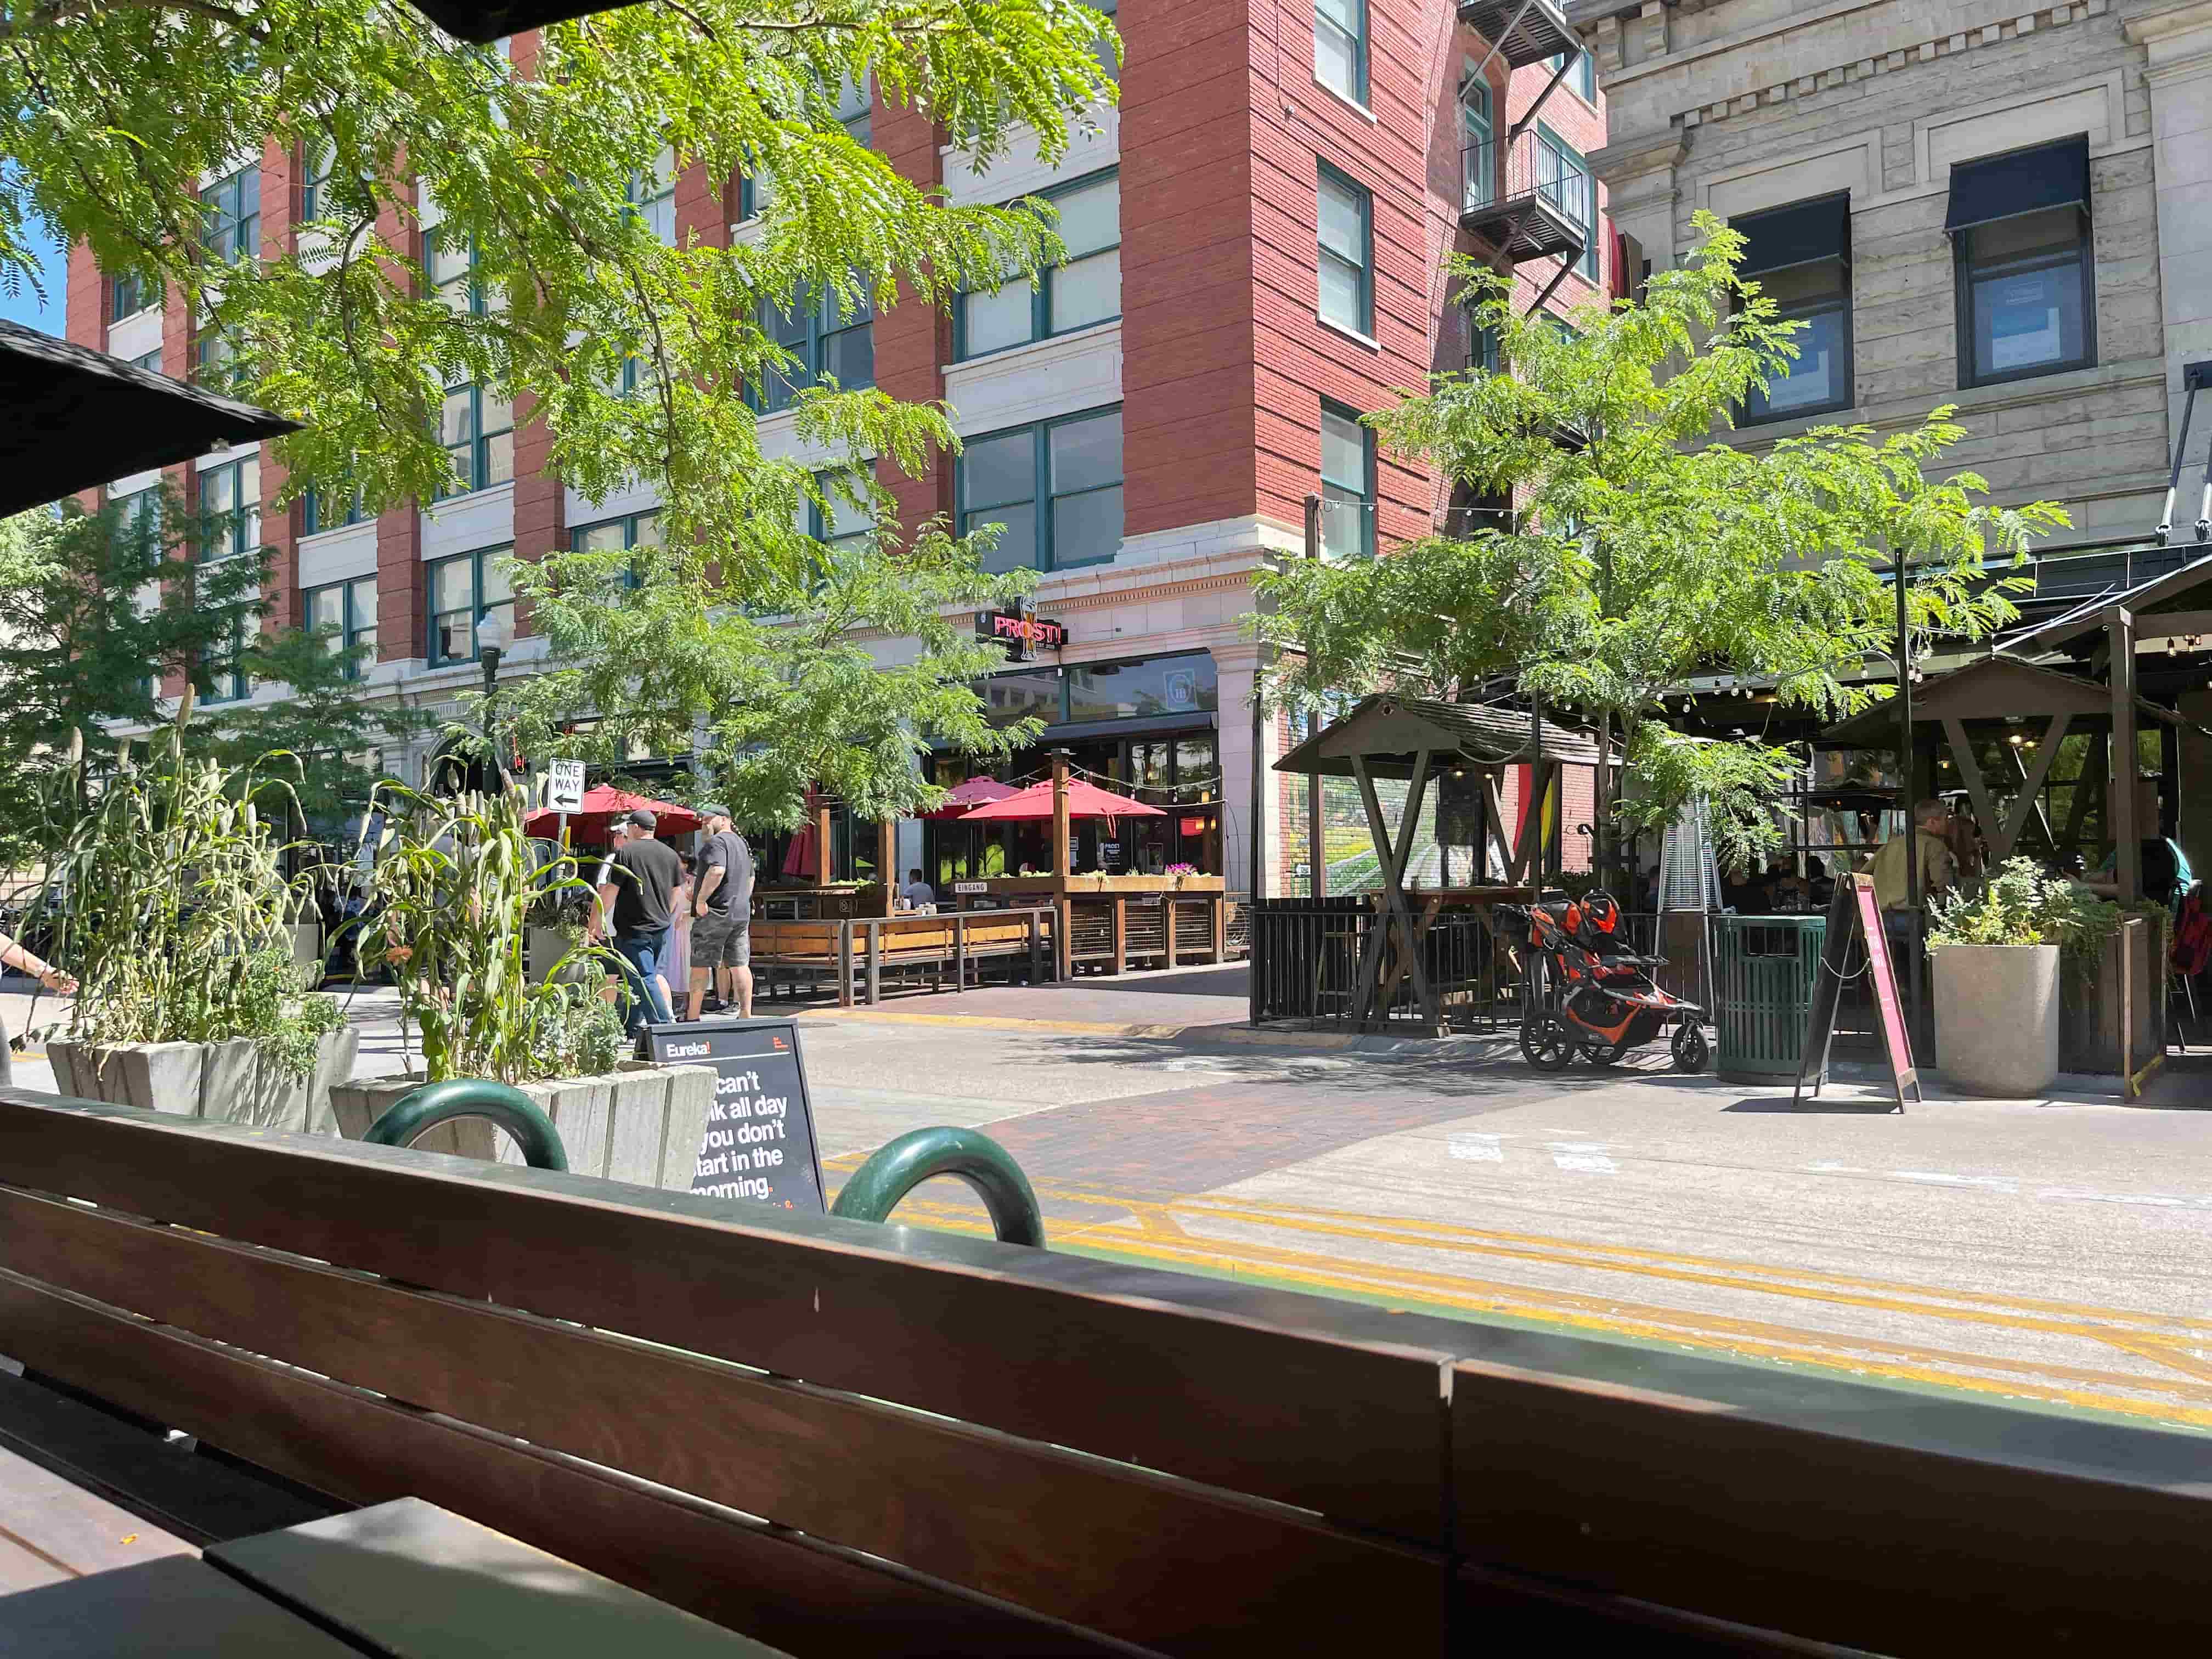 a photo of a pedestrianized street with some colorful medium sized apartment buildings, tasty foliage, outdoor dining seating and a couple people walking